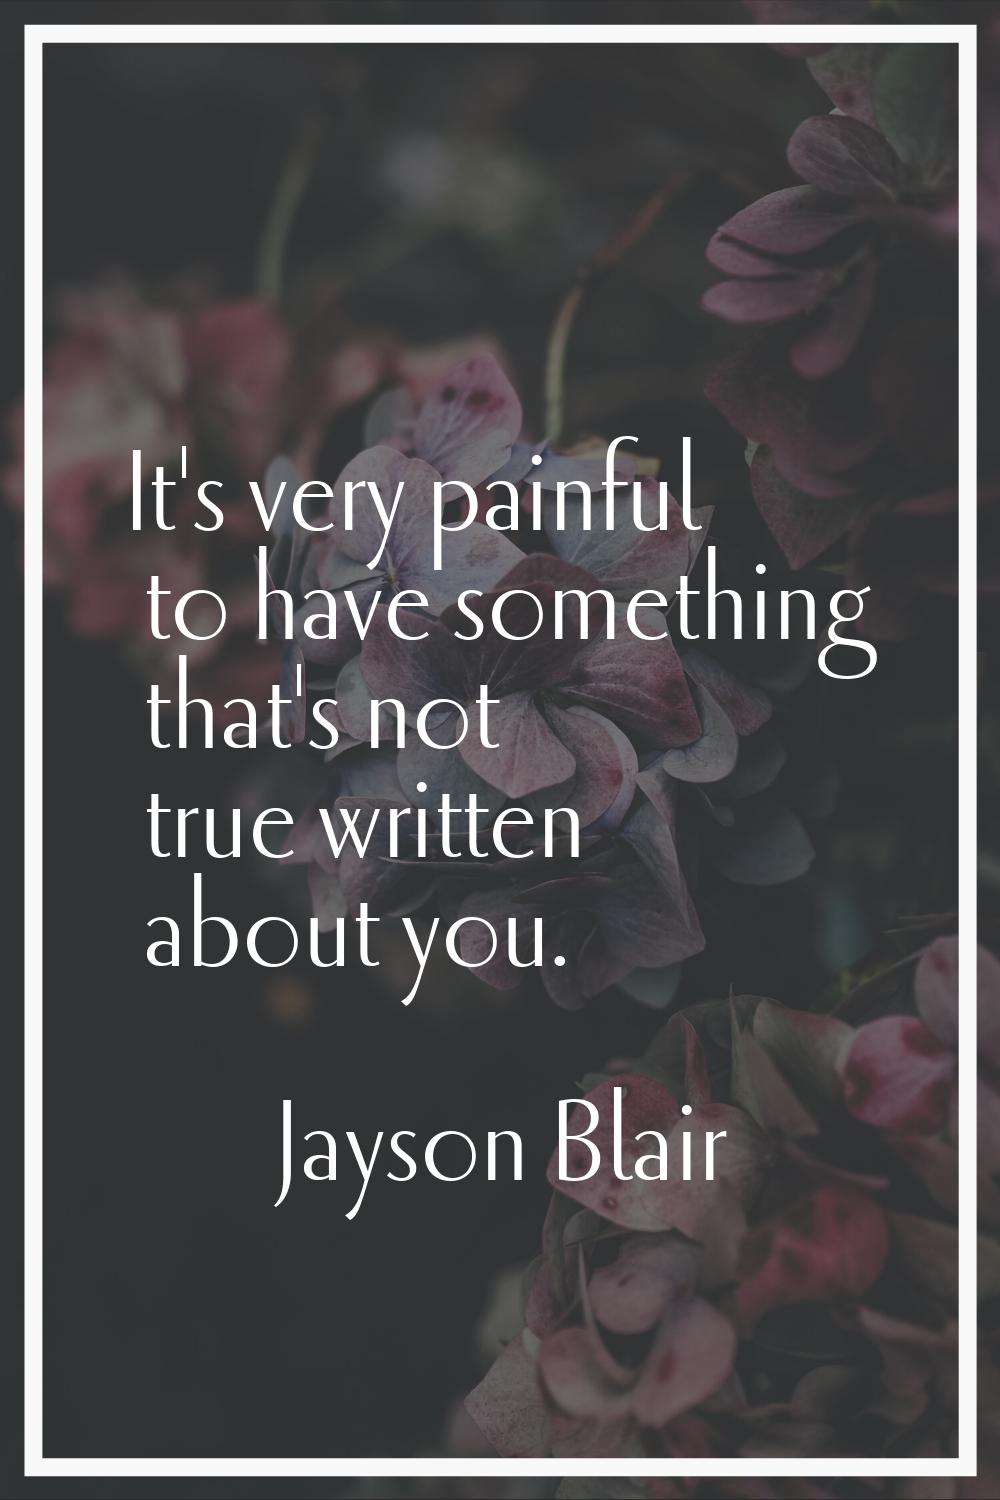 It's very painful to have something that's not true written about you.